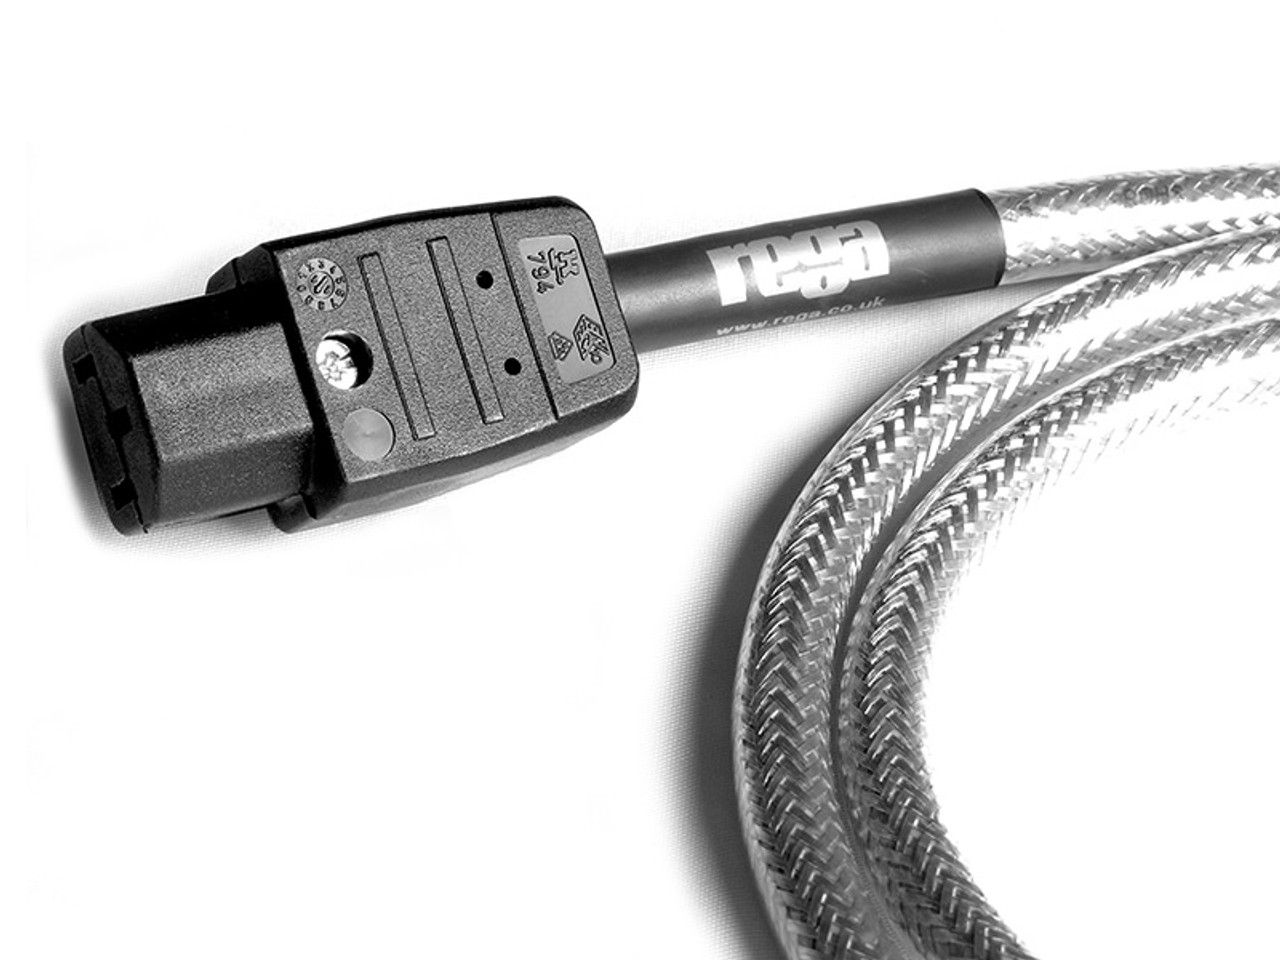 What Is the Ribbed Lead on a Power Cord?